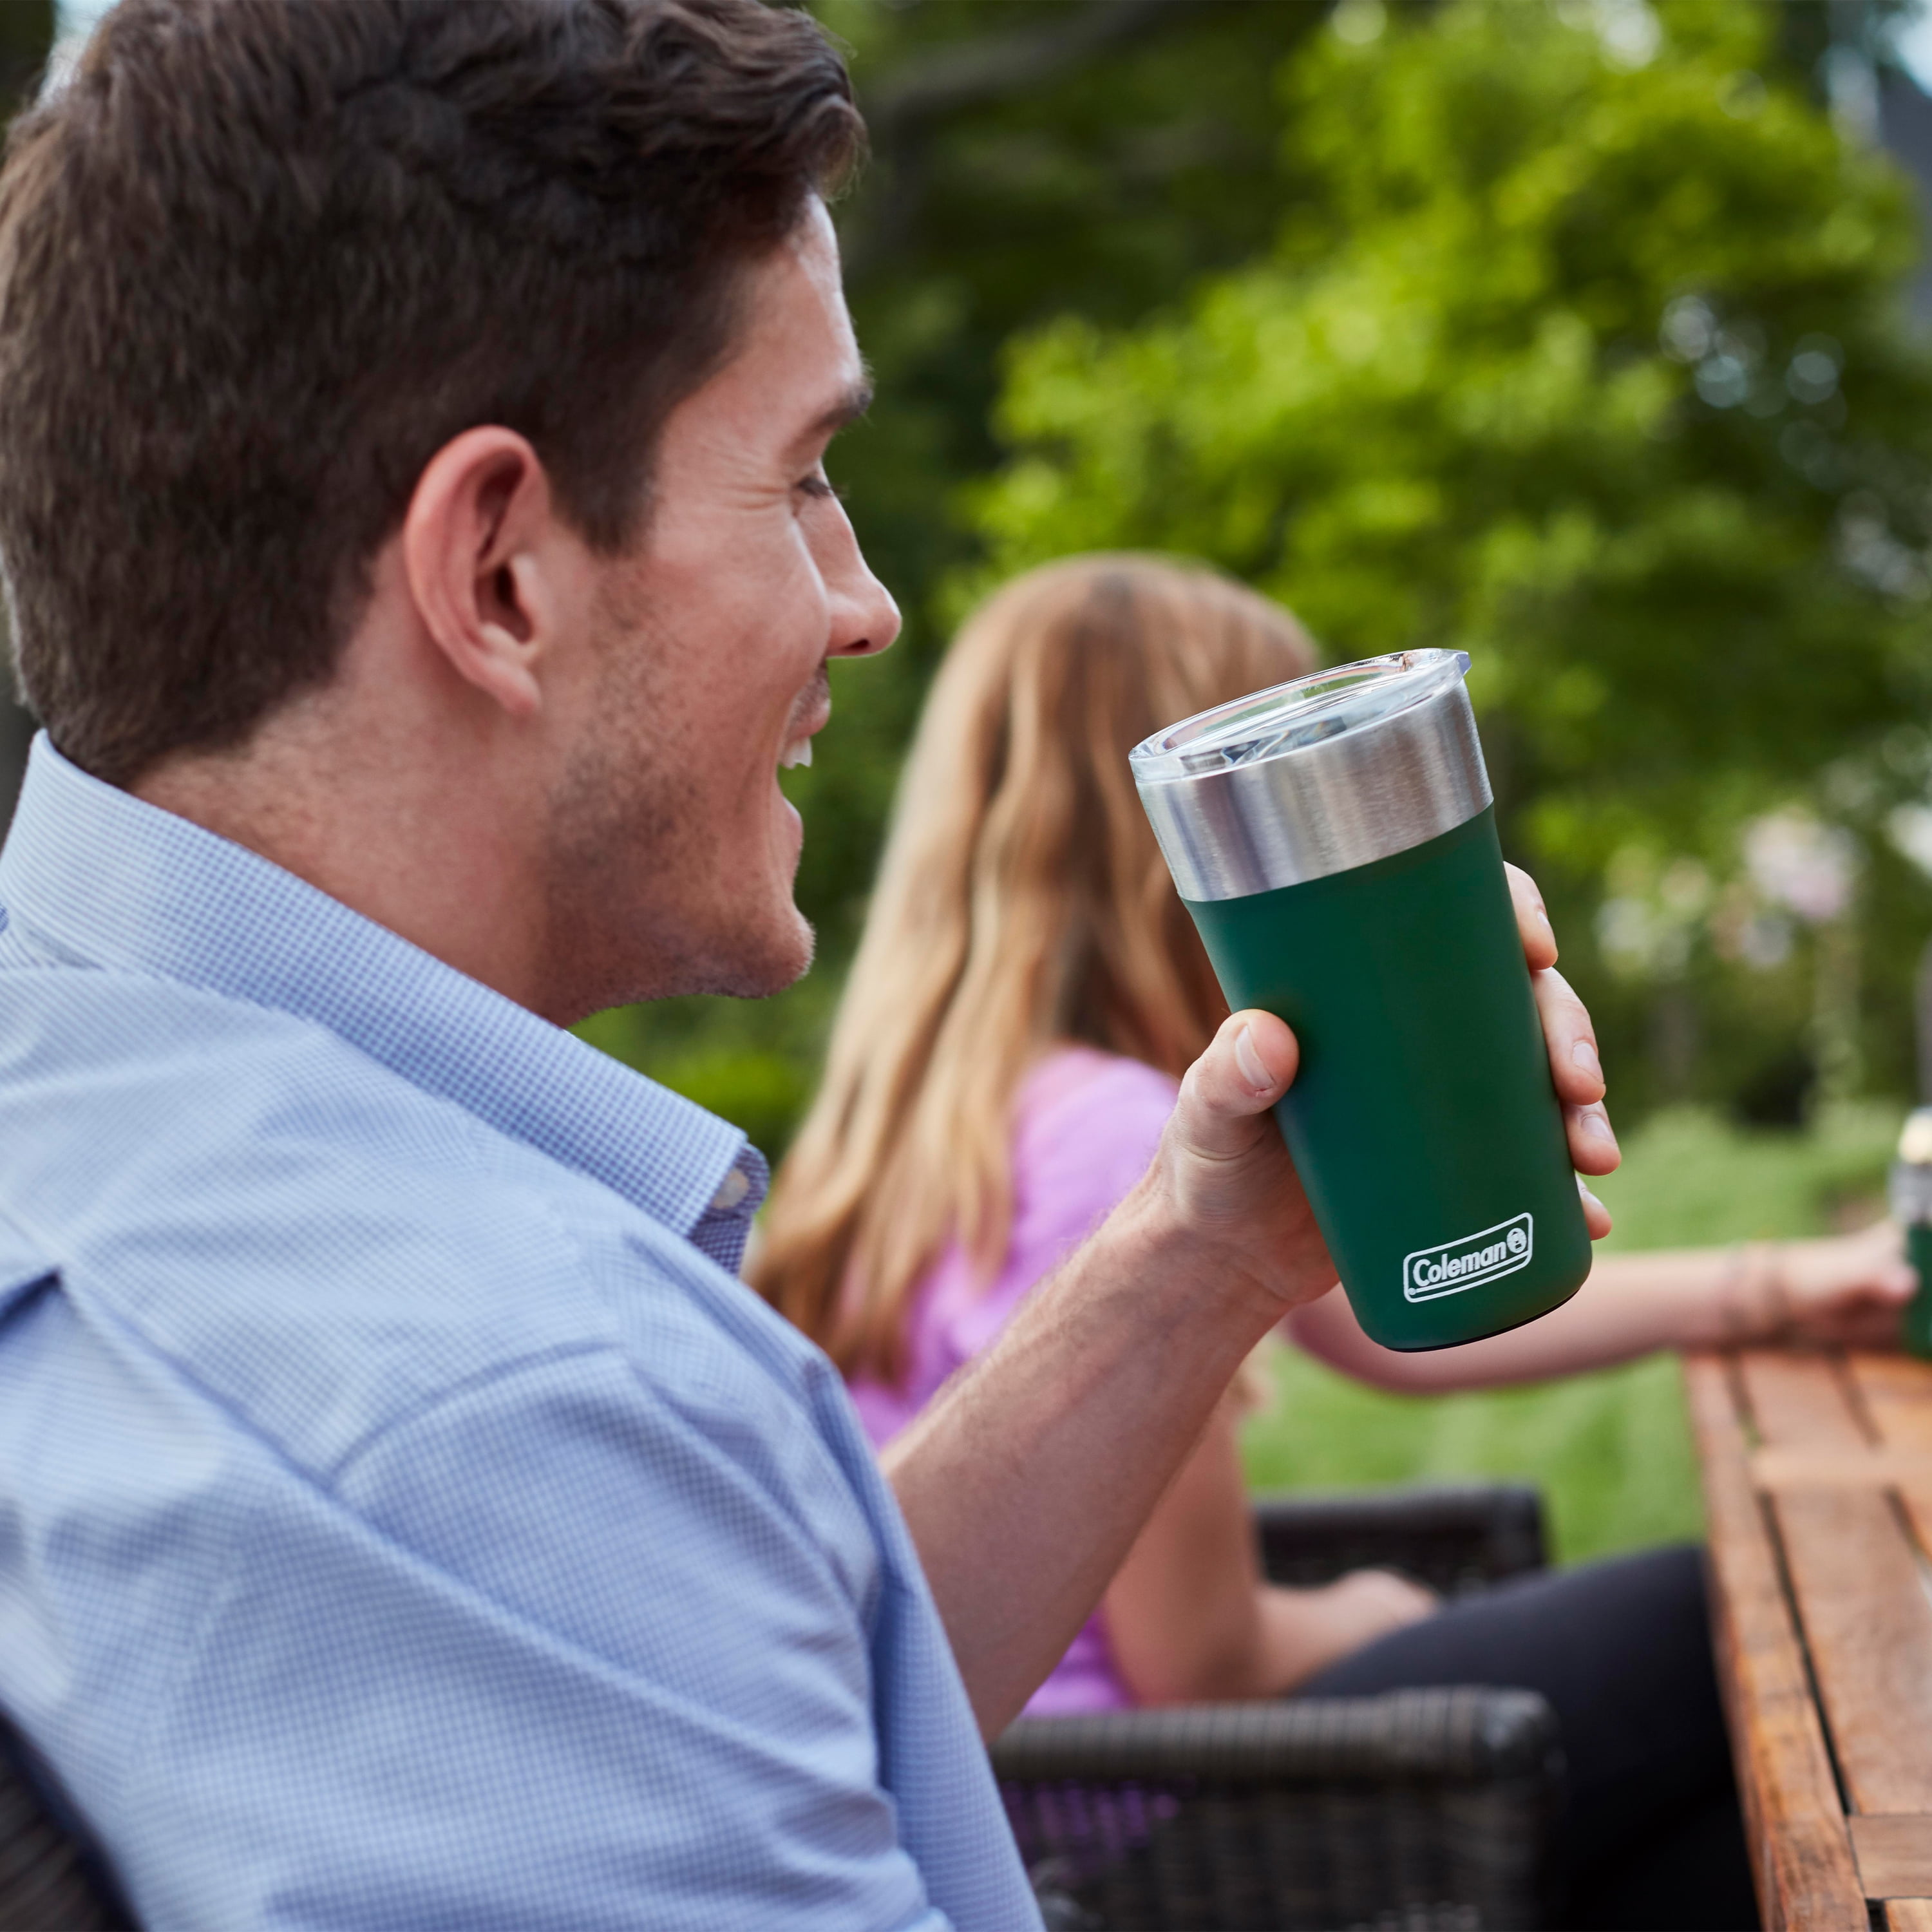 Coleman Brew Insulated Stainless Steel Tumbler $8.25